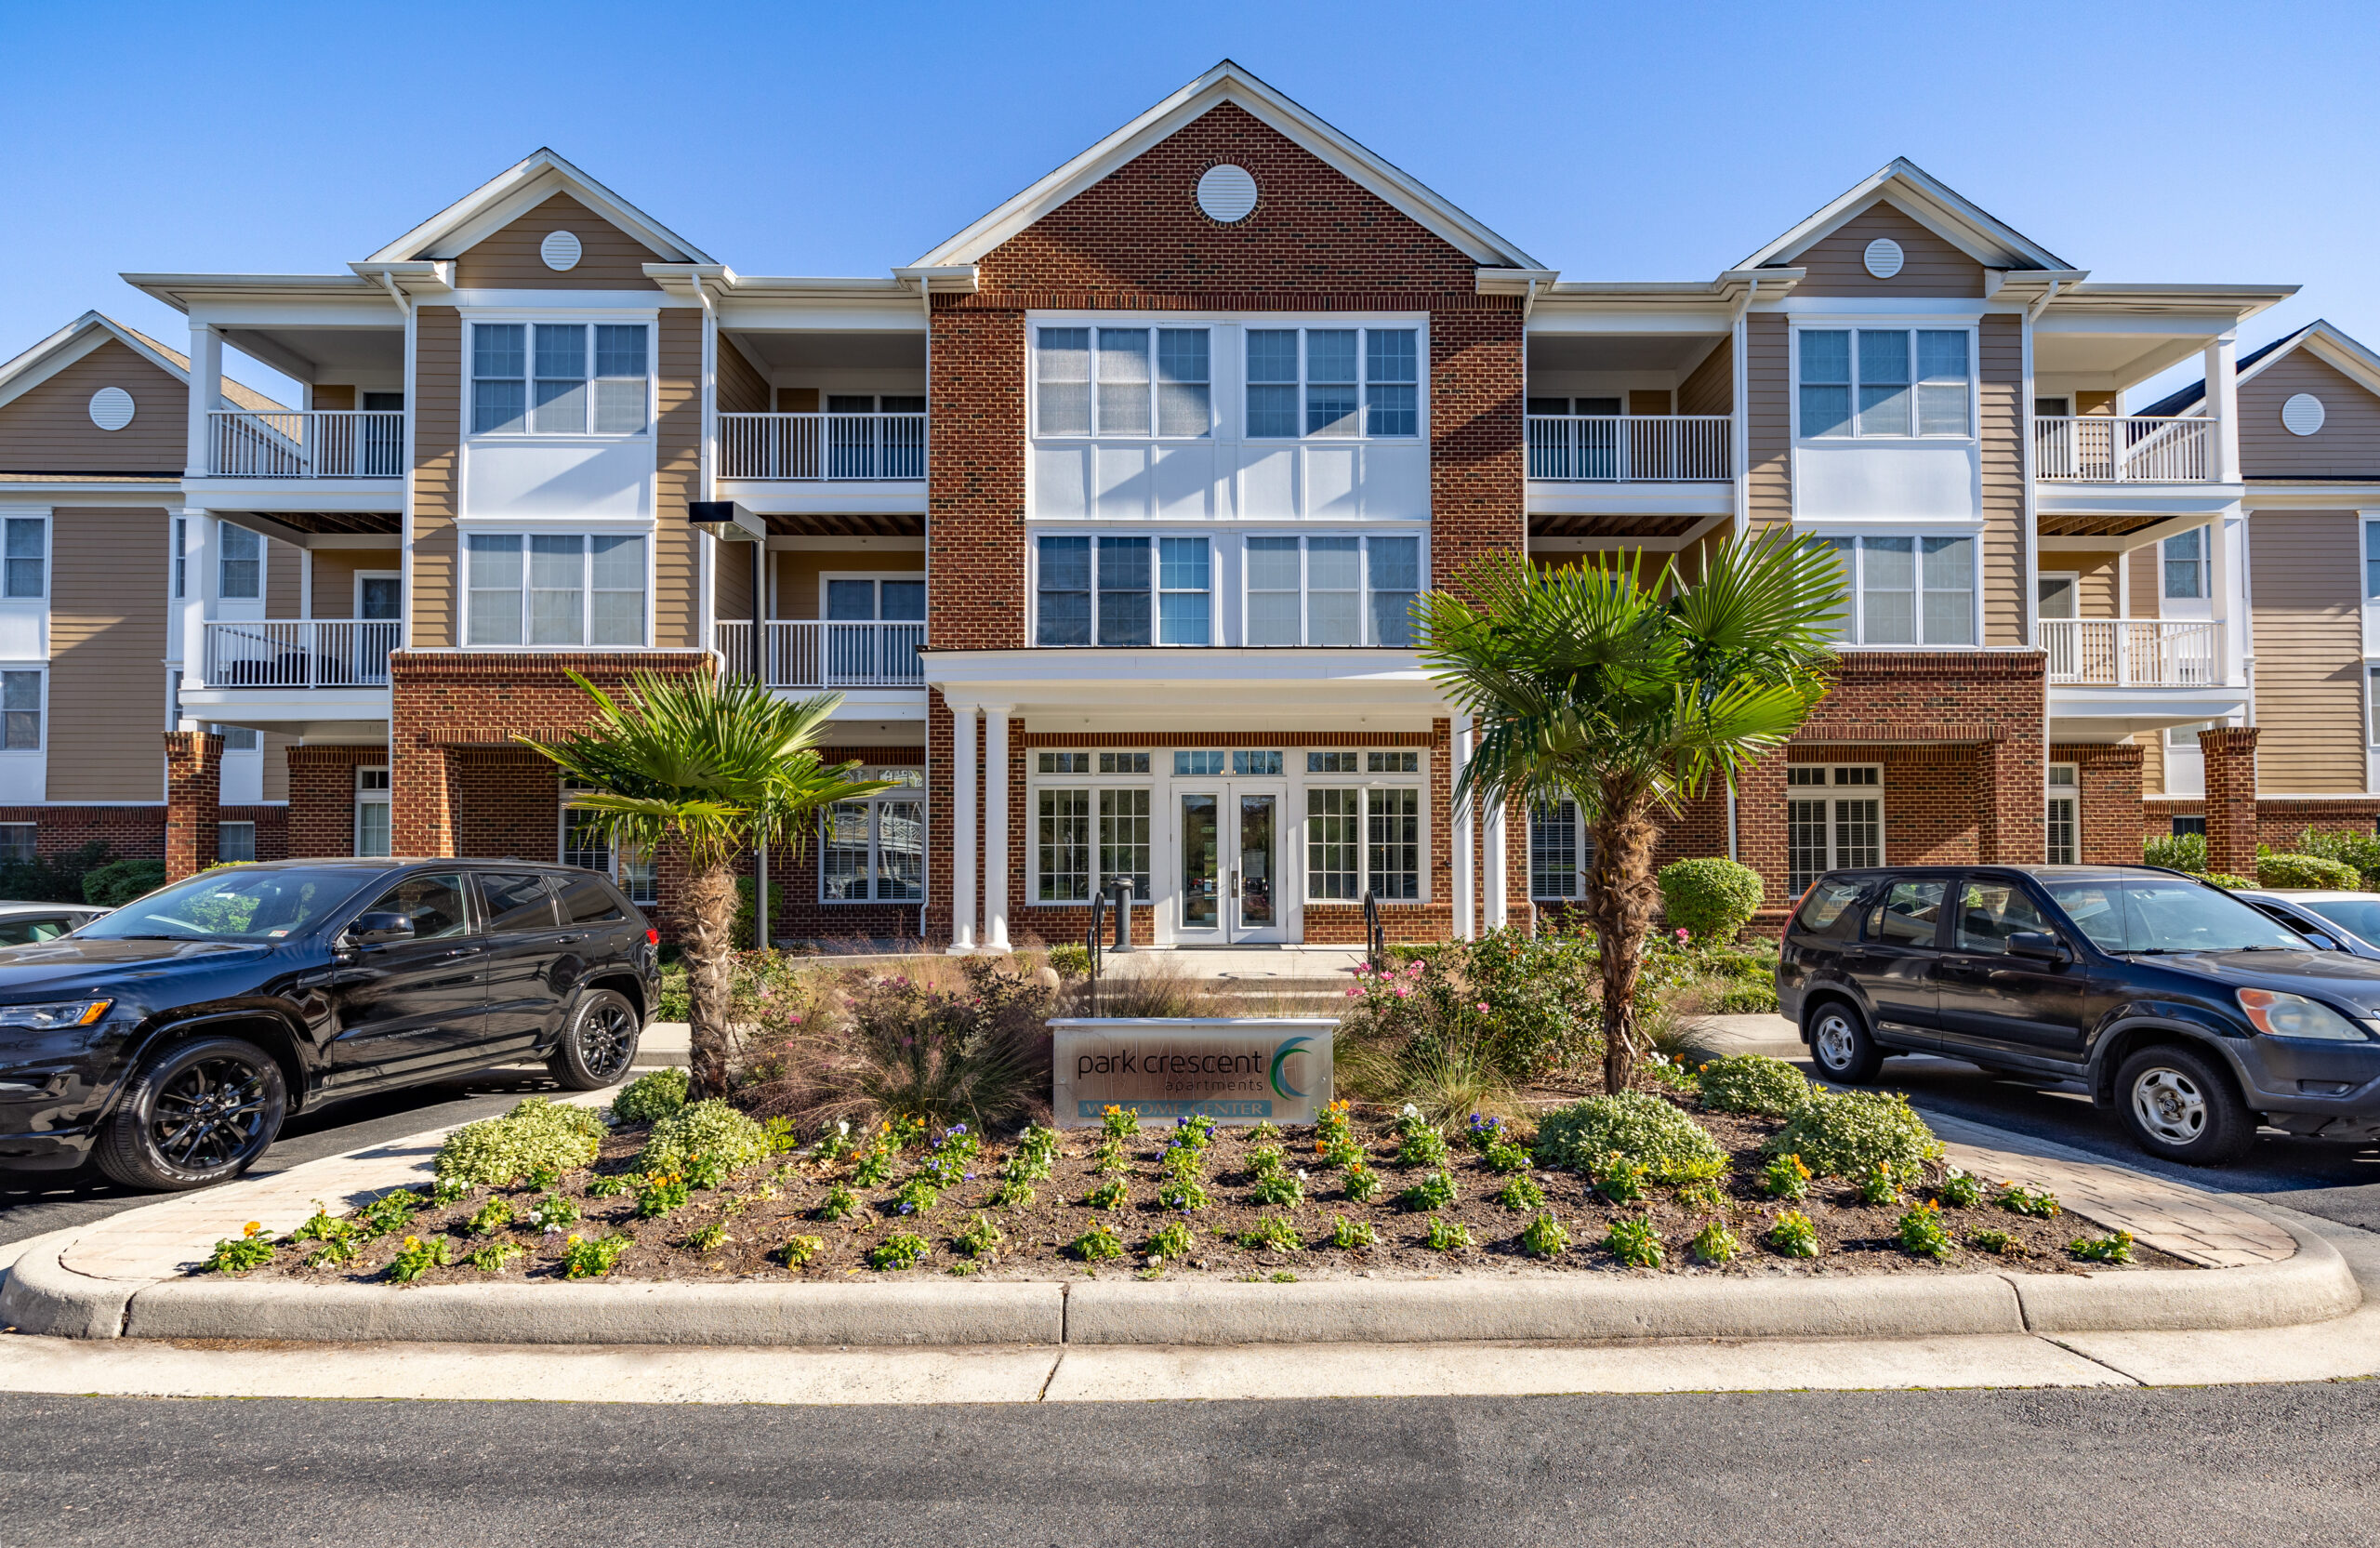 Park Crescent is a 400-unit garden apartment located in Norfolk, Virginia